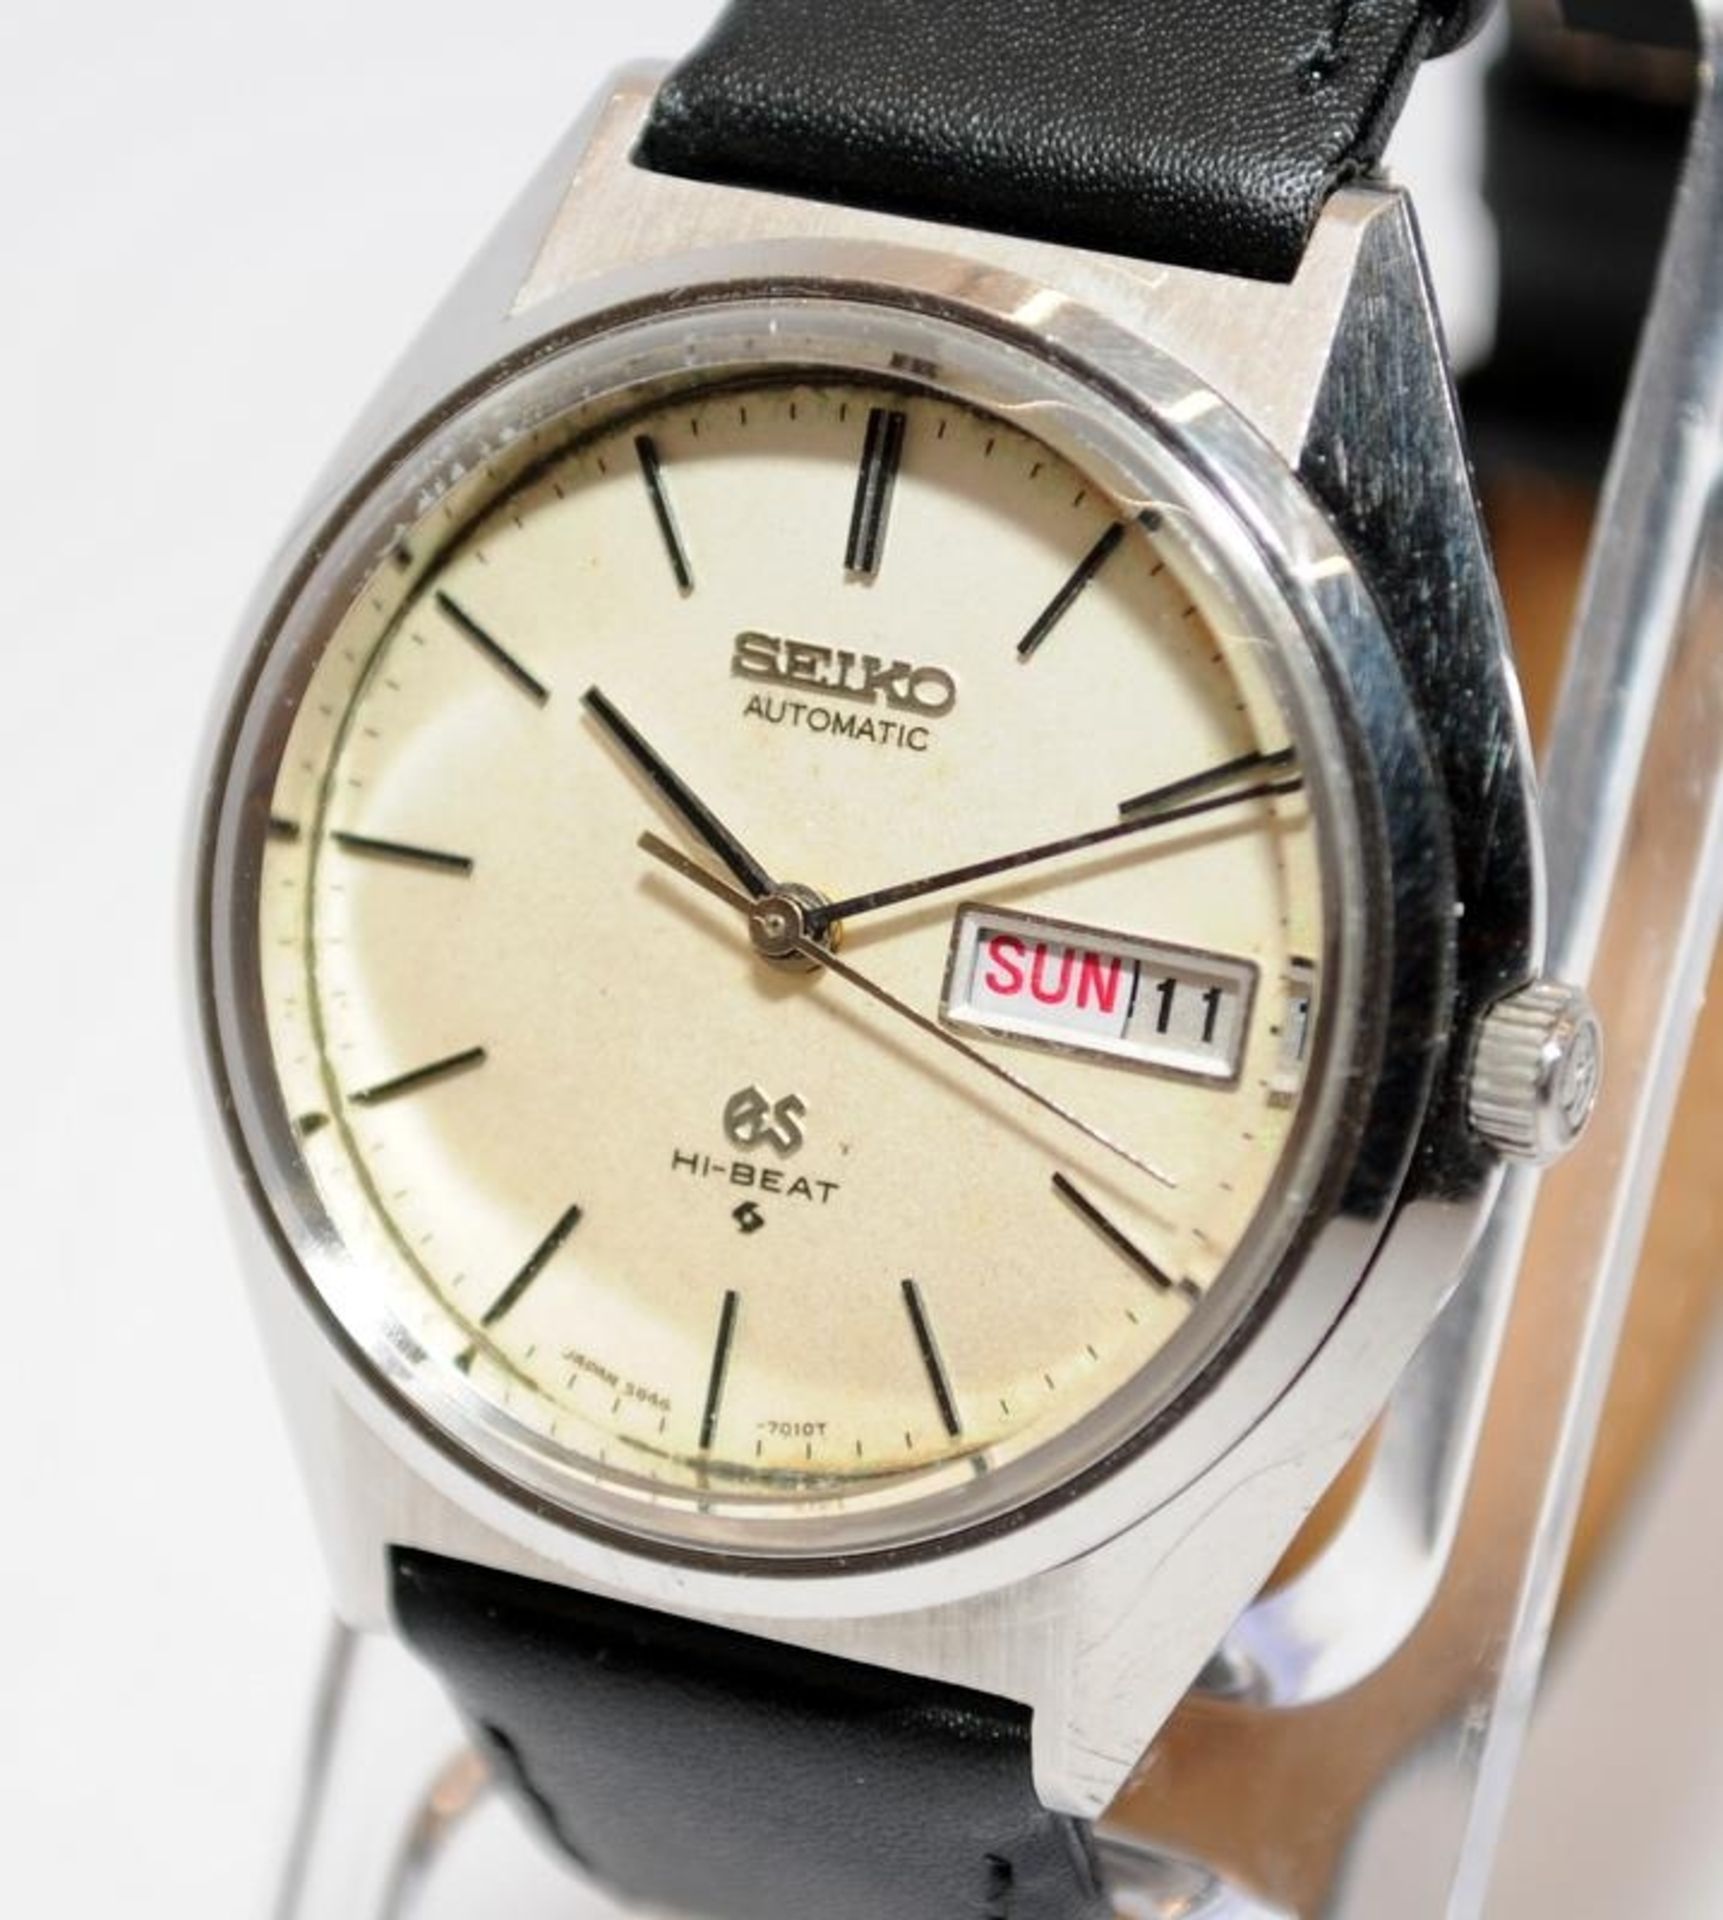 Top quality vintage Grand Seiko 56GS series gents automatic dress watch model ref 5646-7011,